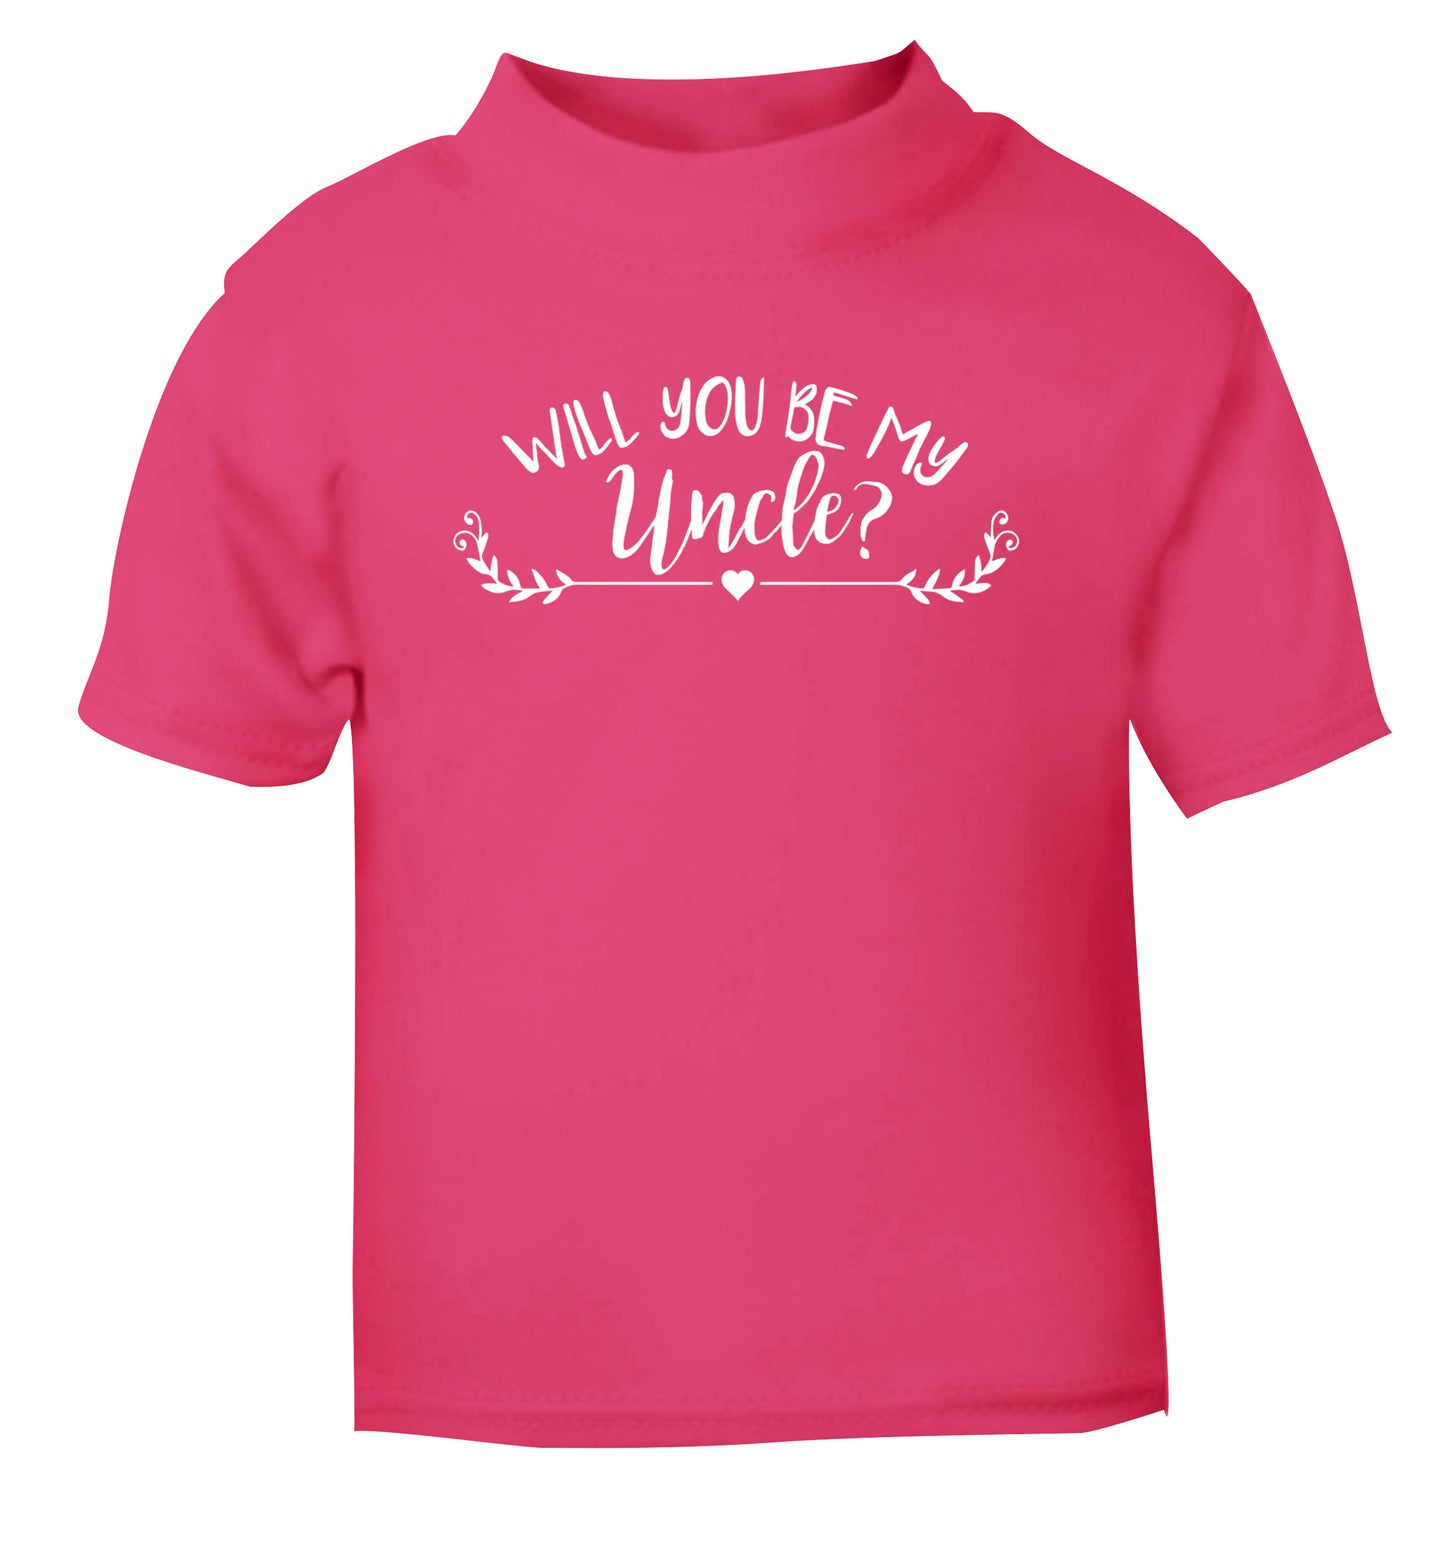 Will you be my uncle? pink Baby Toddler Tshirt 2 Years